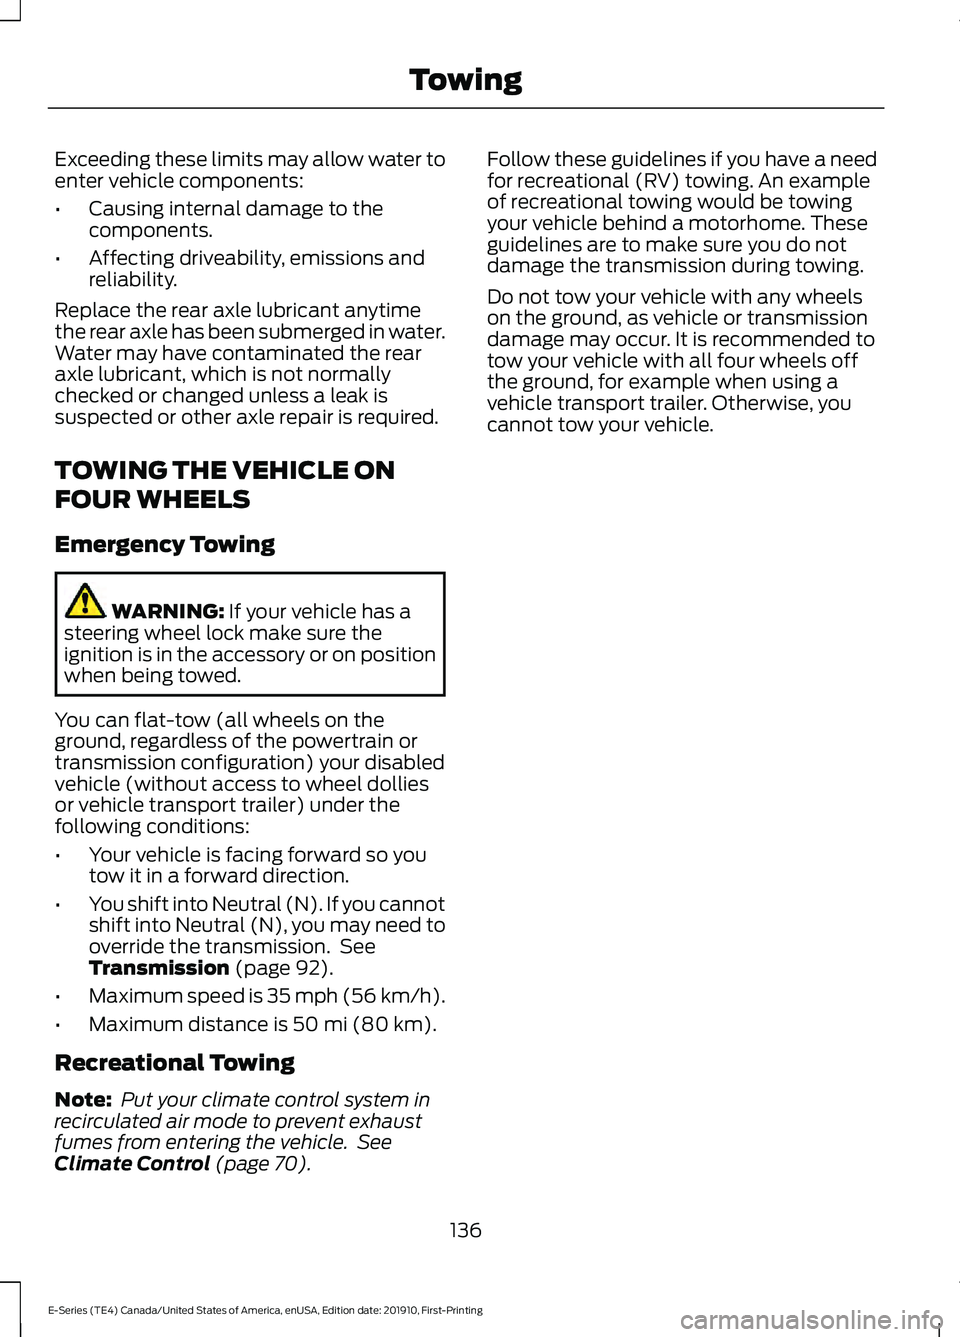 FORD E-350 2021 User Guide Exceeding these limits may allow water to
enter vehicle components:
•
Causing internal damage to the
components.
• Affecting driveability, emissions and
reliability.
Replace the rear axle lubrican